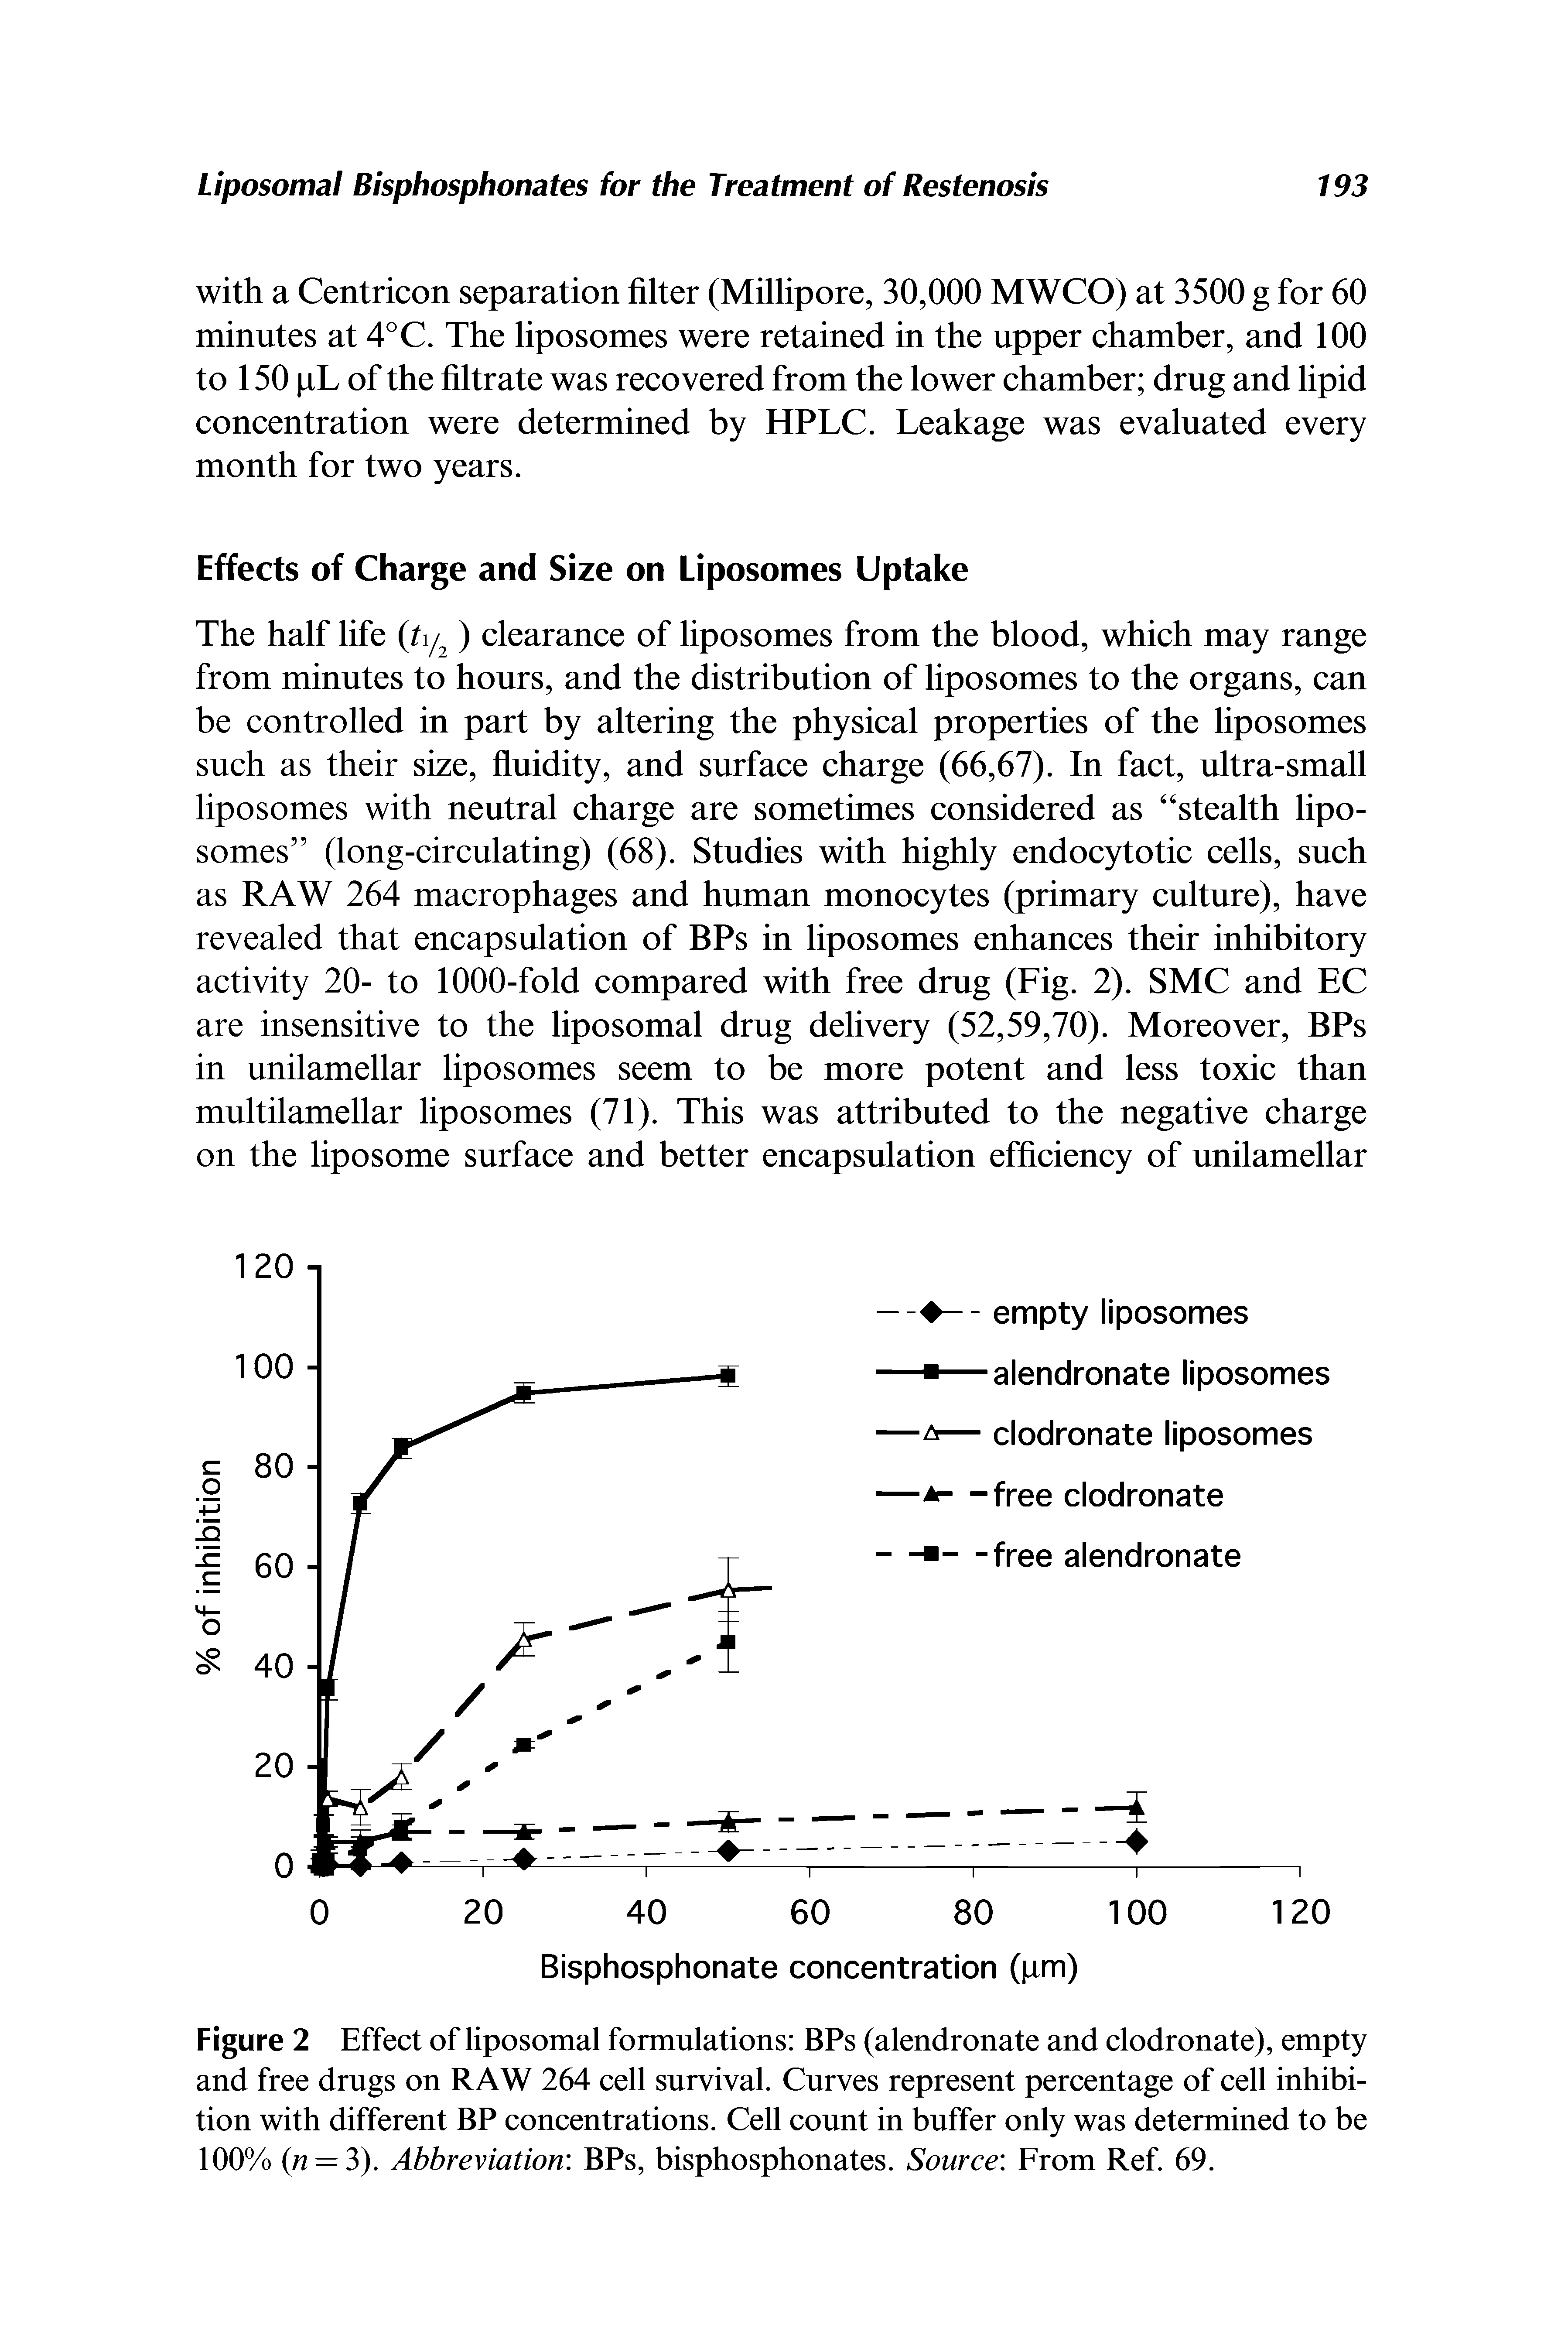 Figure 2 Effect of liposomal formulations BPs (alendronate and clodronate), empty and free drugs on RAW 264 cell survival. Curves represent percentage of cell inhibition with different BP concentrations. Cell count in buffer only was determined to be 100% (n = 3). Abbreviation BPs, bisphosphonates. Source From Ref 69.